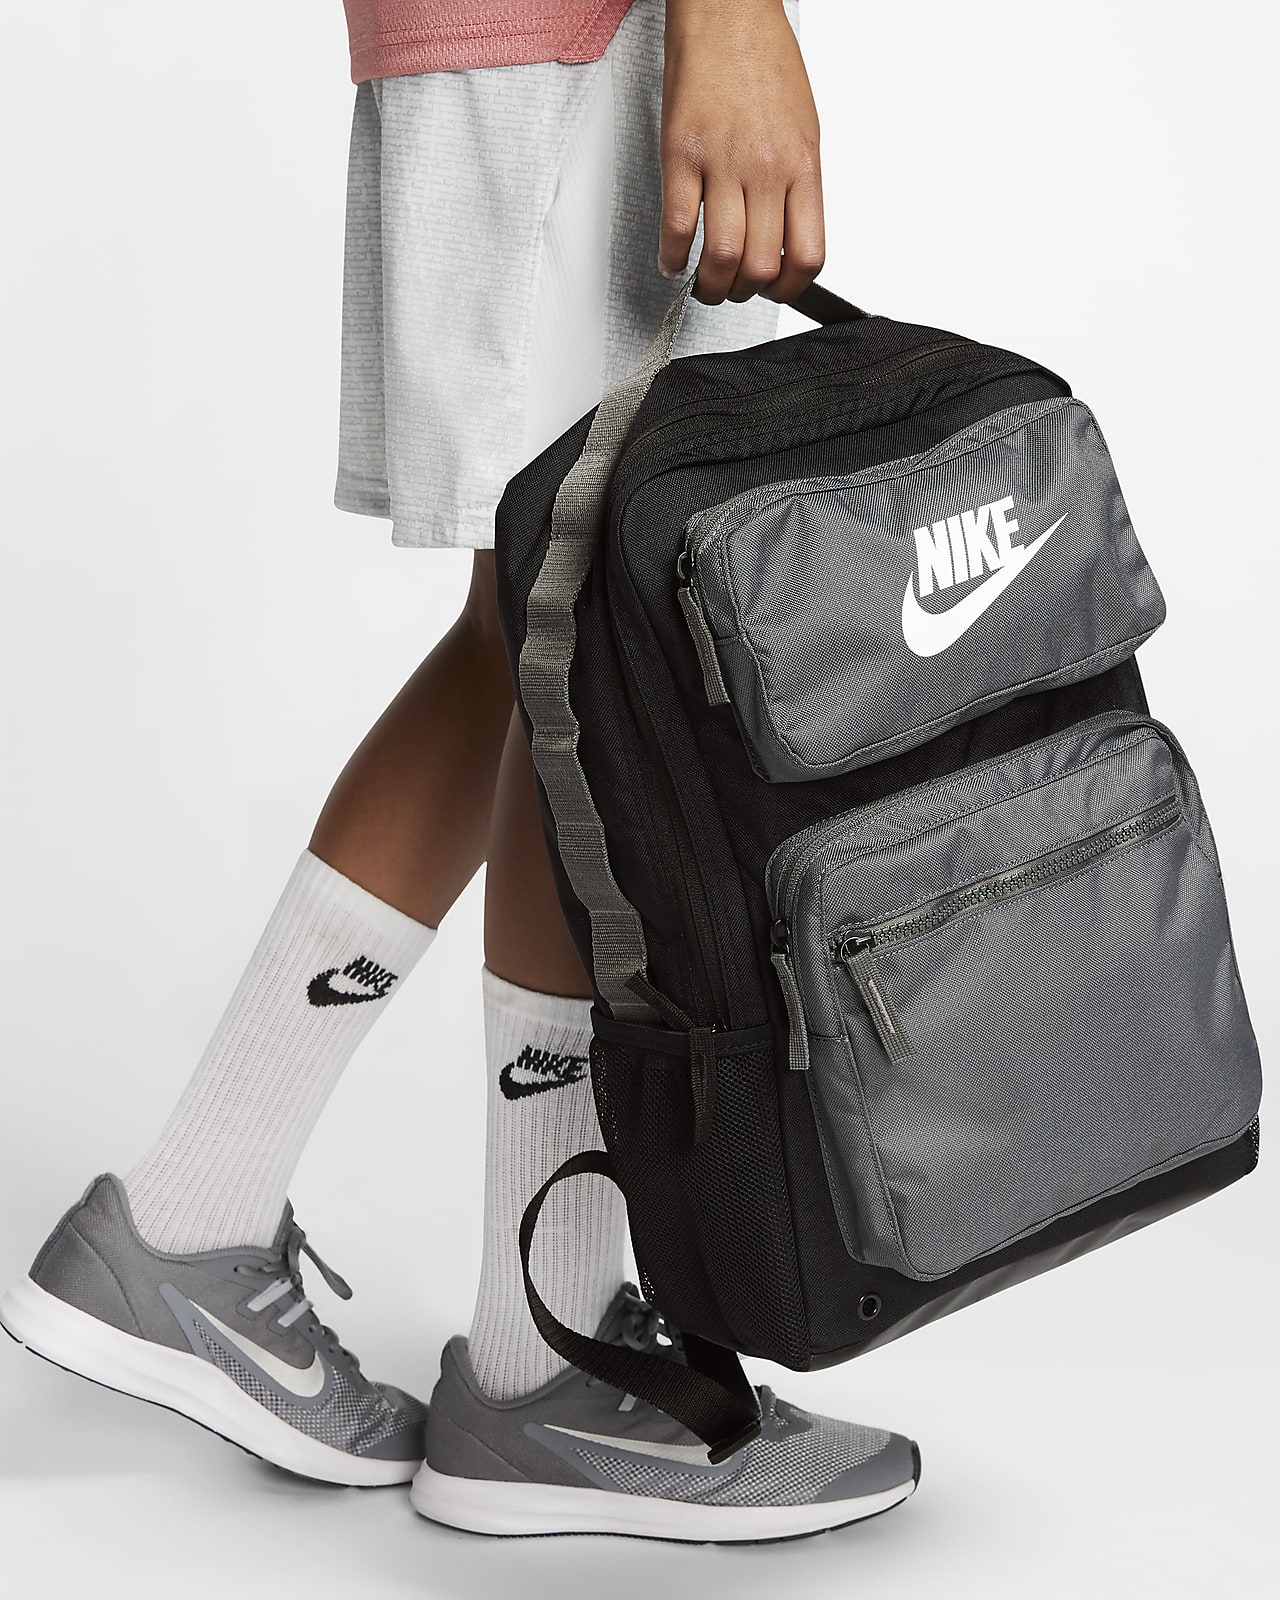 nike book bags with wheels